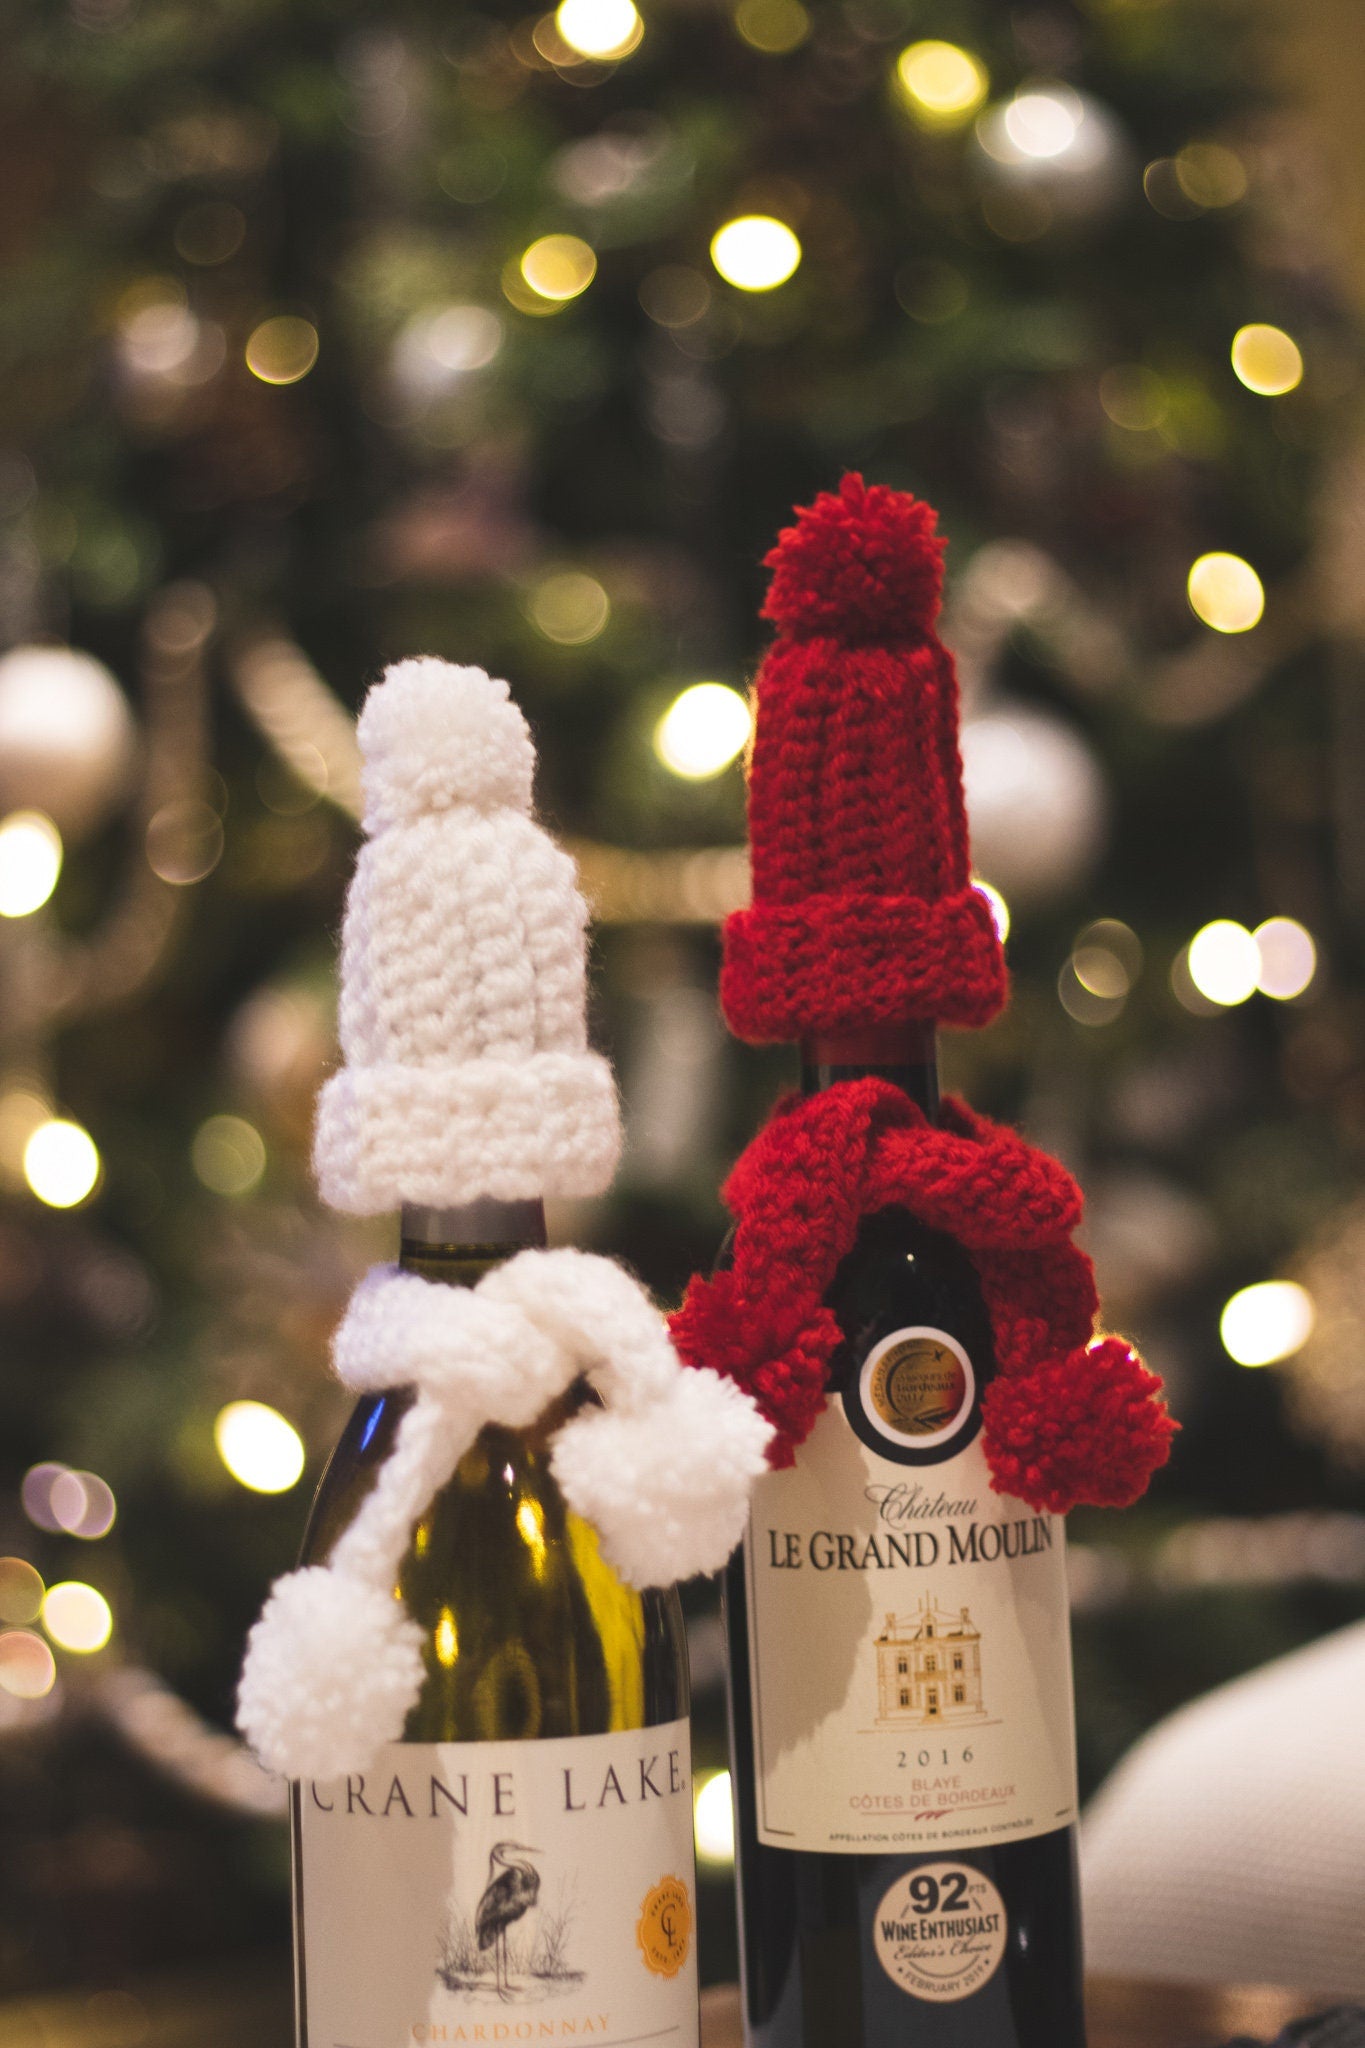 Cozy Wine Bottle Hat and Scarf Hand Crocheted in Snow White and Red - Set of 2